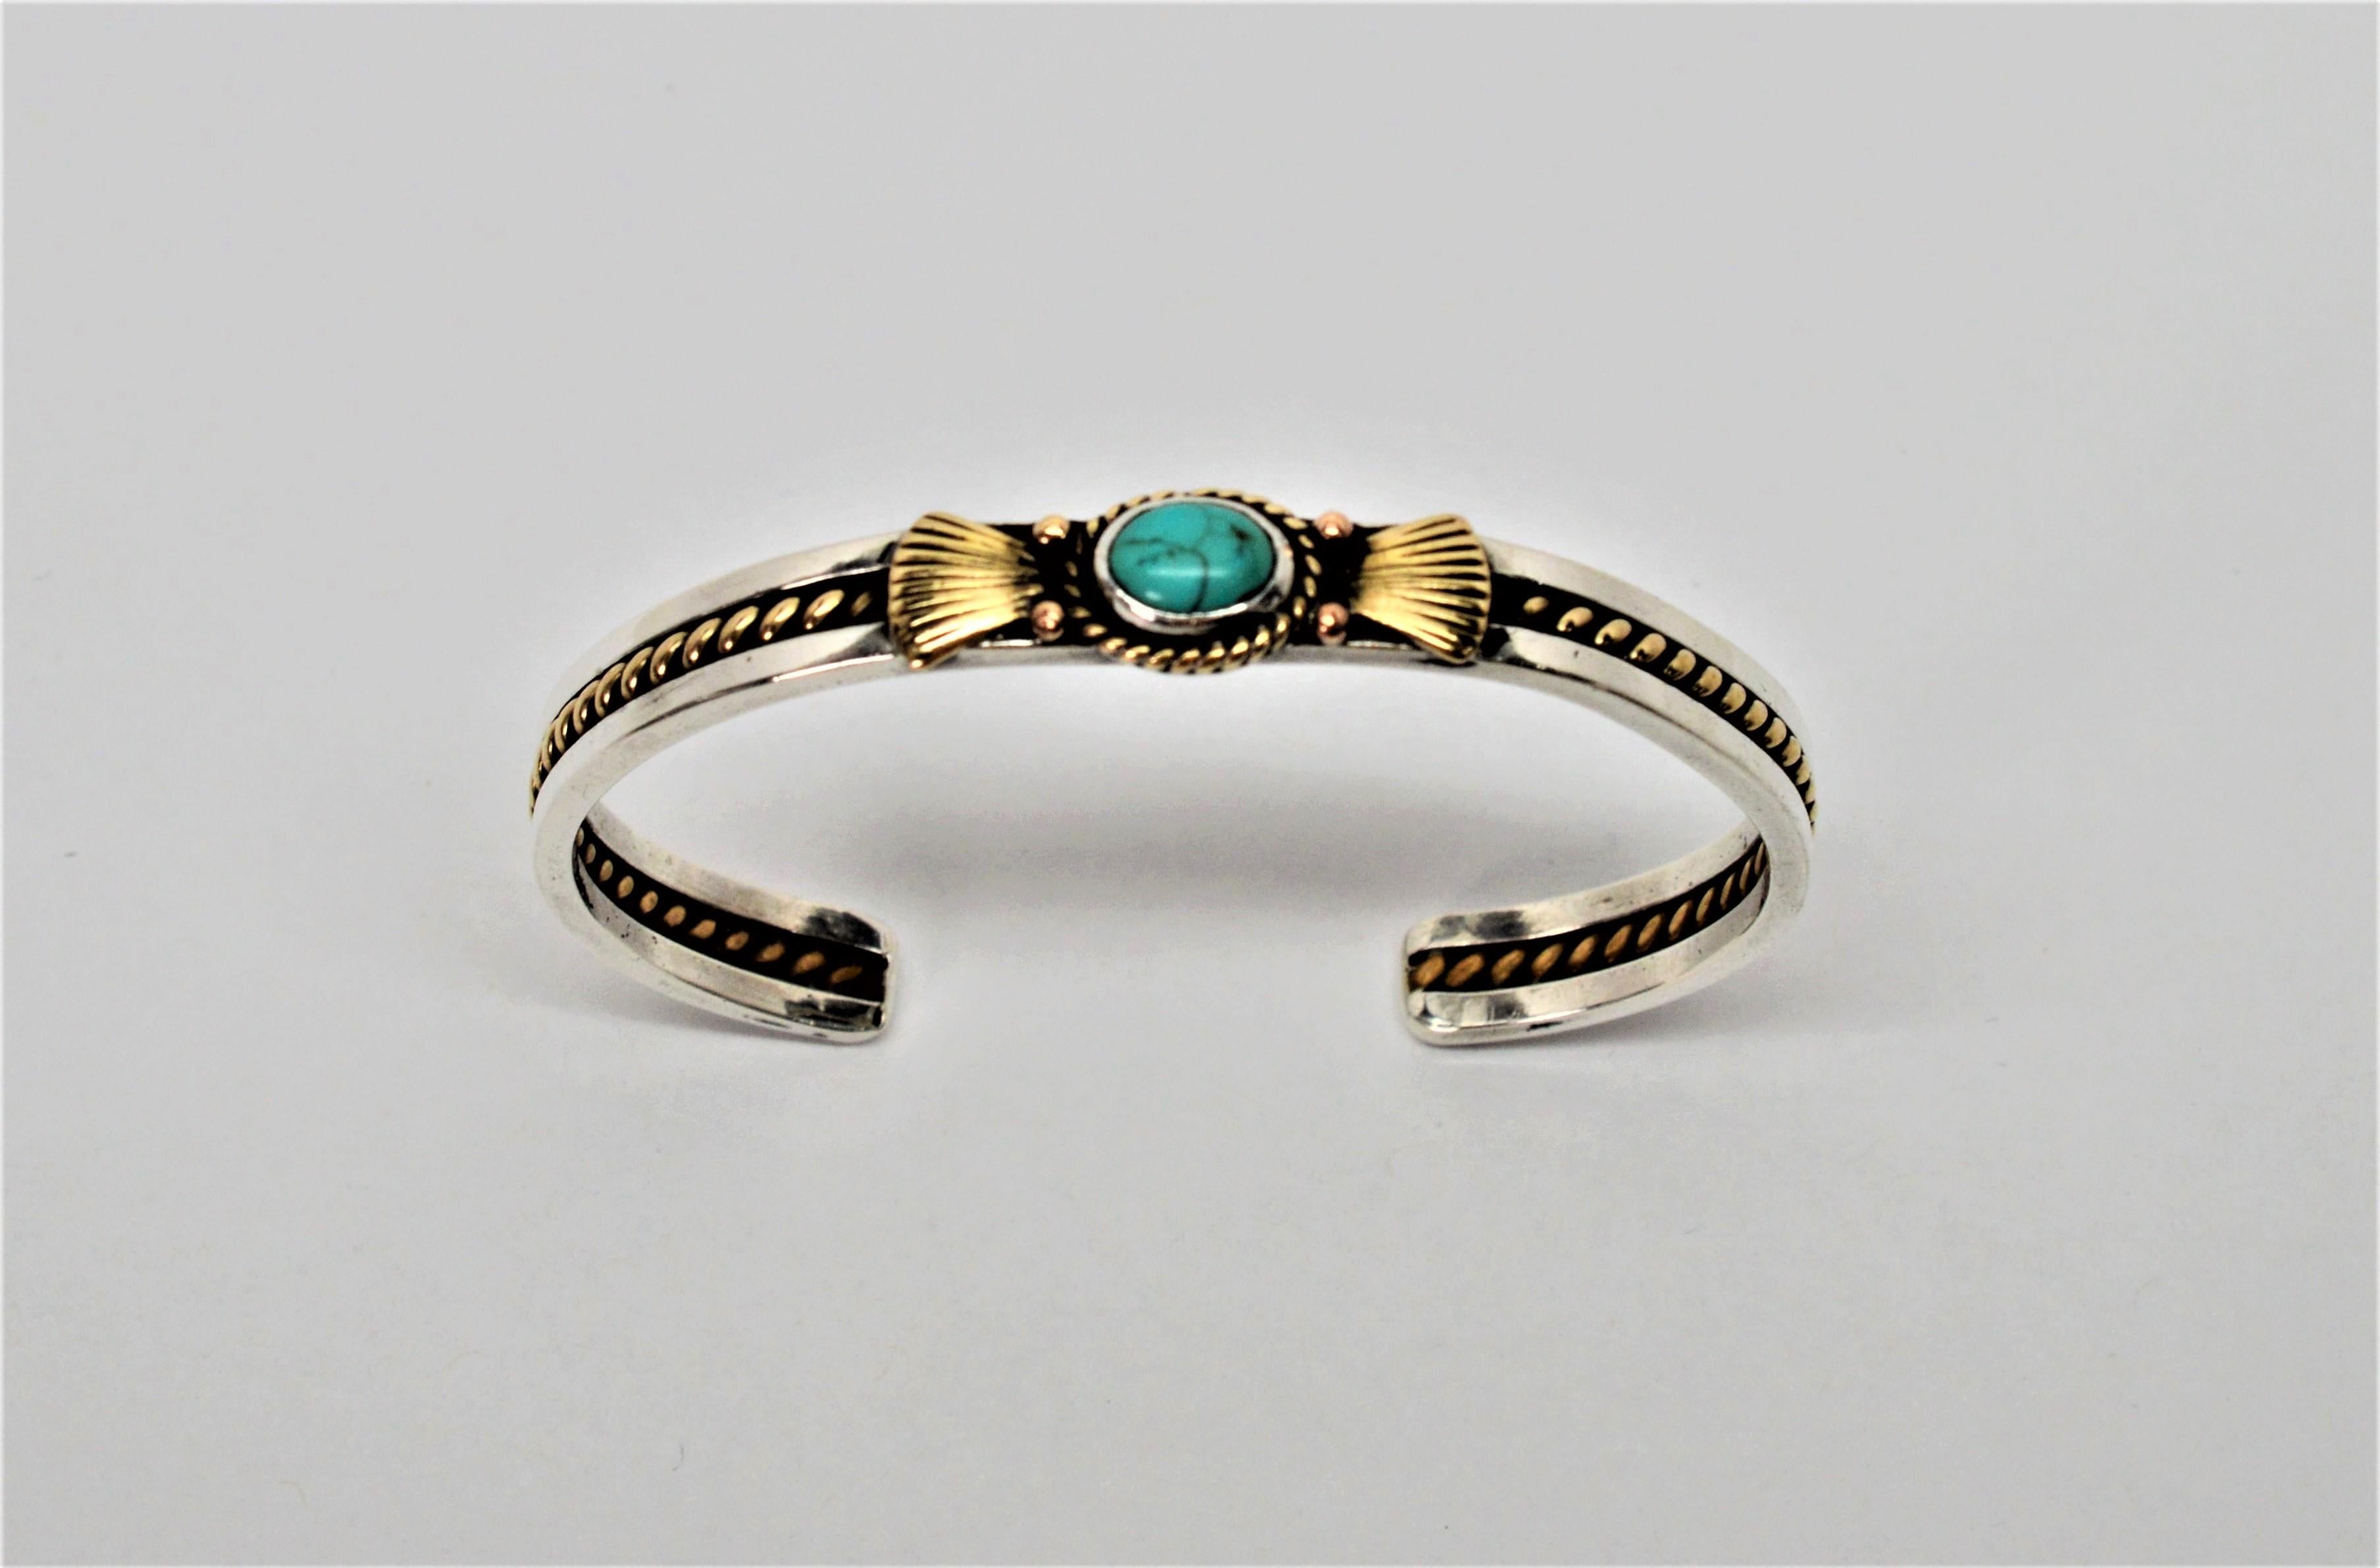 If you are a fan of Southwestern style jewelry, you will love this vintage cuff bracelet. The two toned cuff features a natural turquoise stone cabochon that is bezel set in sterling and accented with an attractive shell patterned ten karat 10K